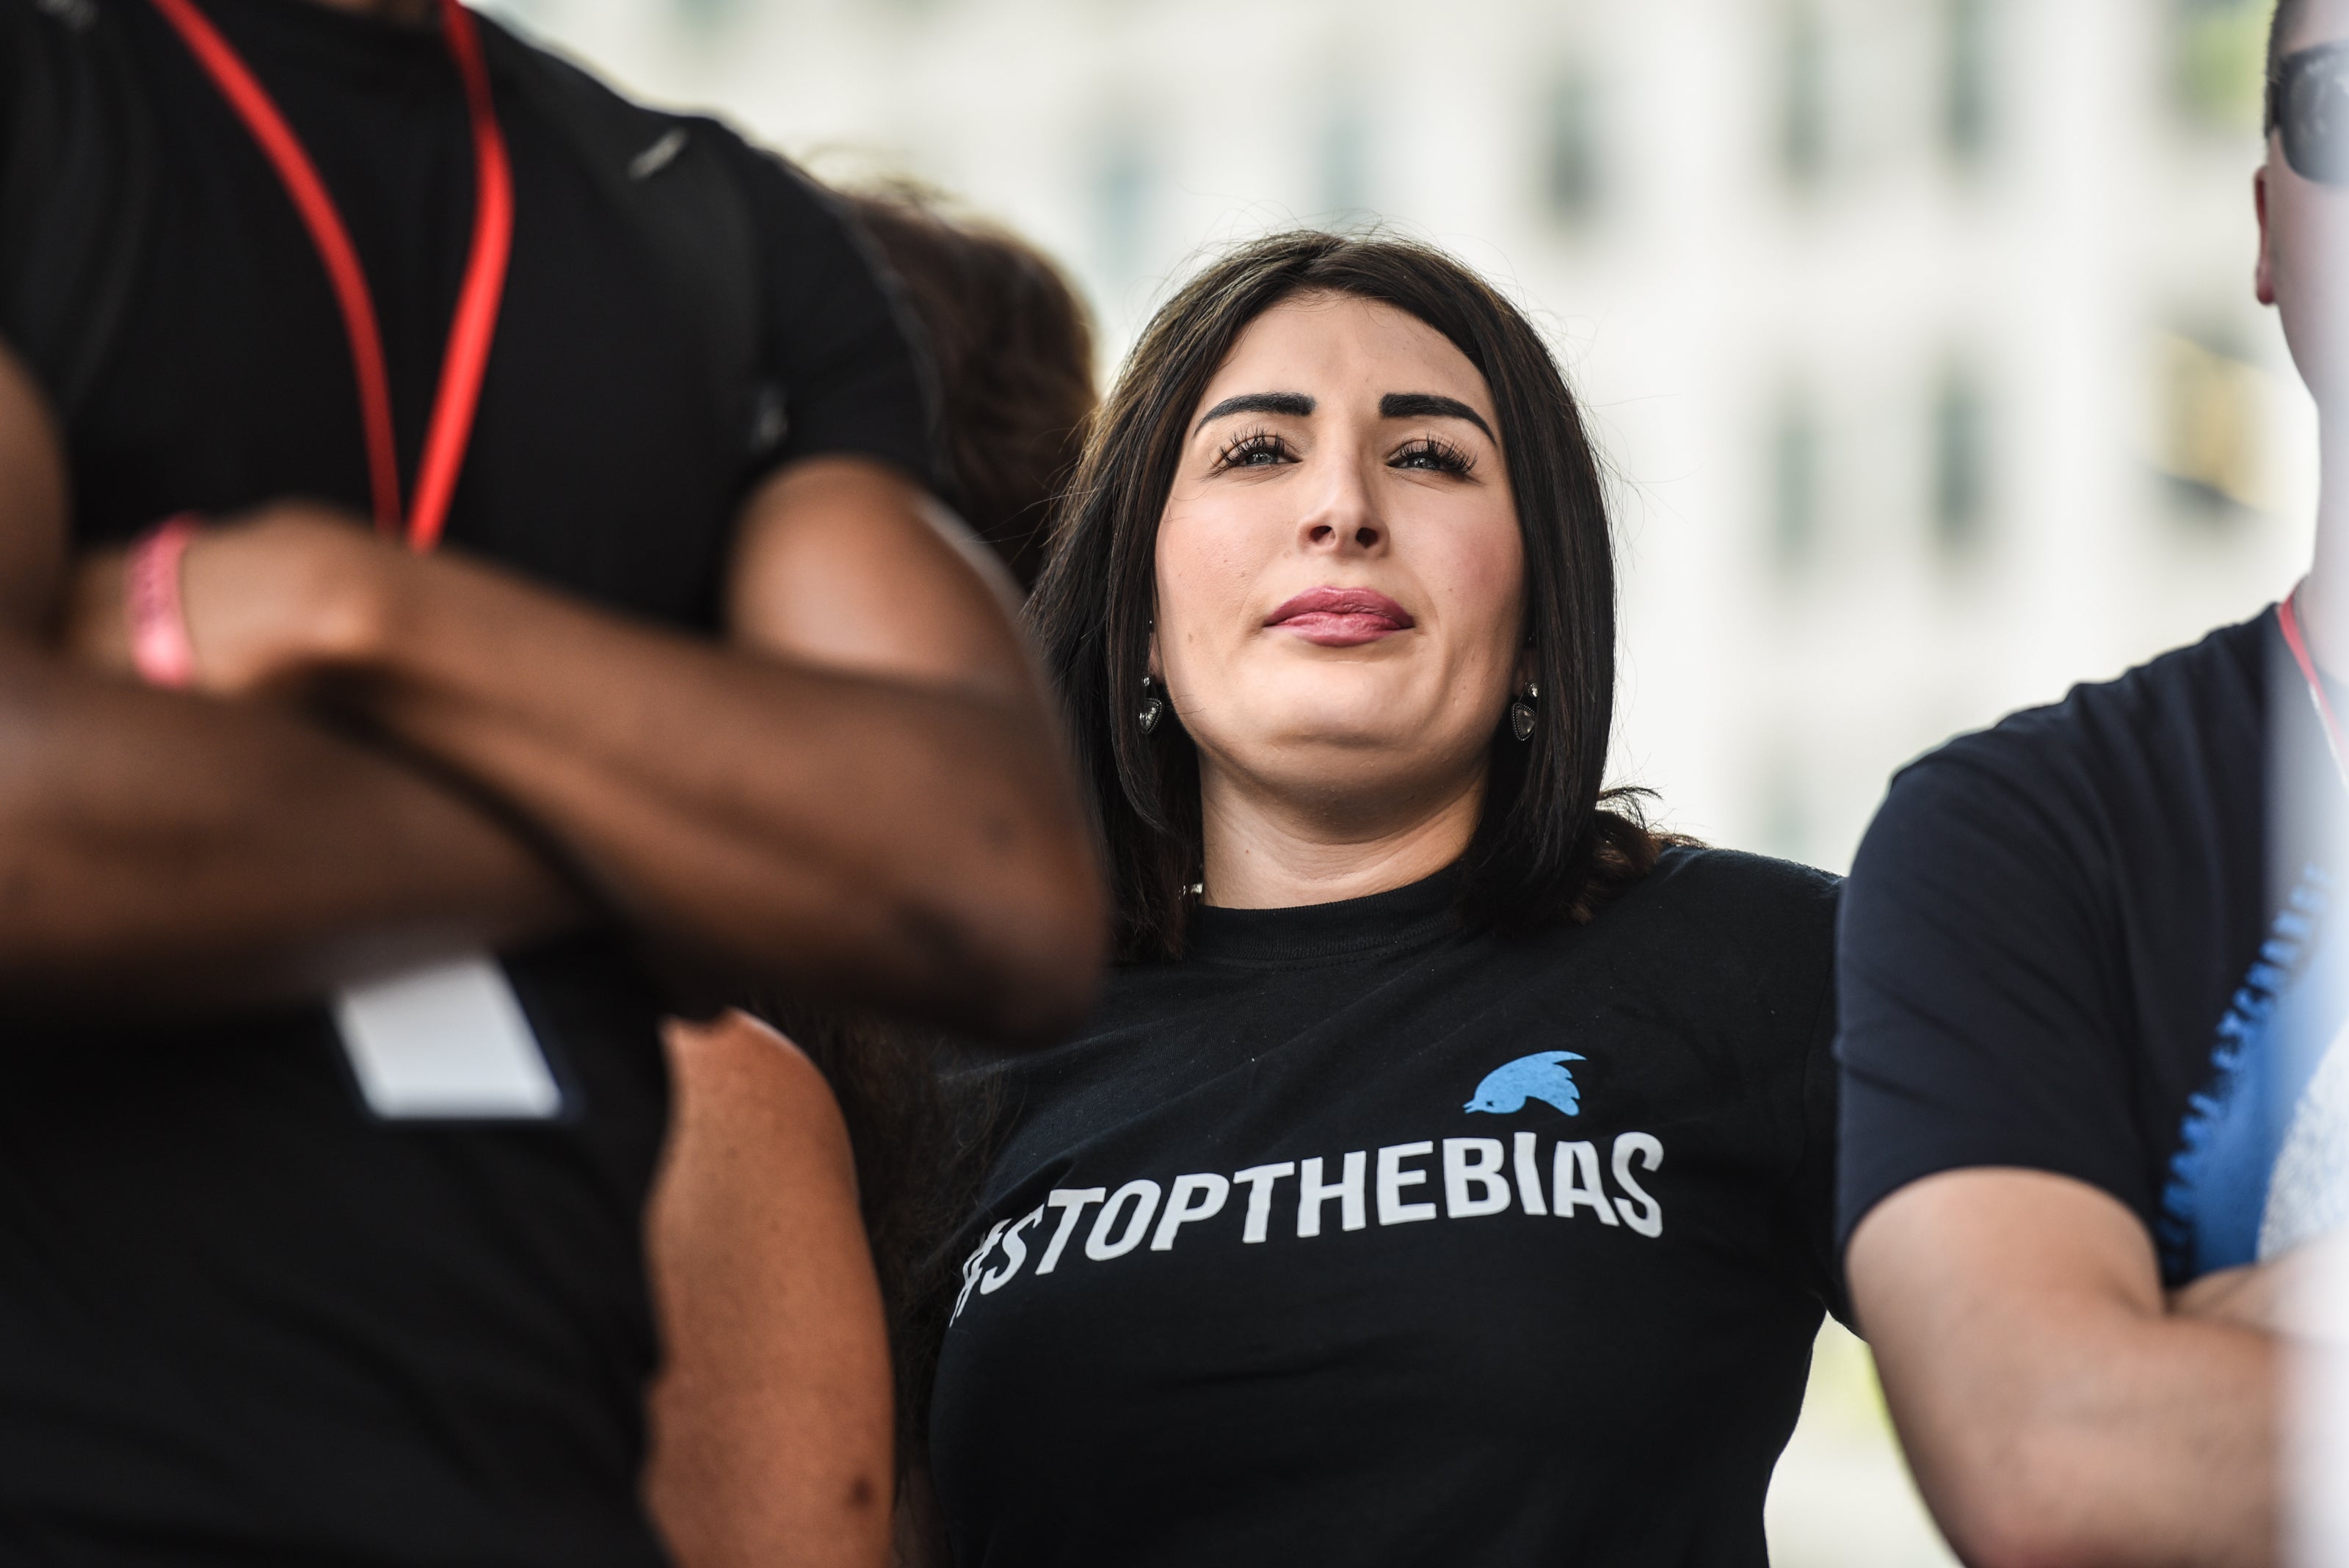 Laura Loomer waits backstage during a "Demand Free Speech" rally on Freedom Plaza on July 6, 2019 in Washington, DC